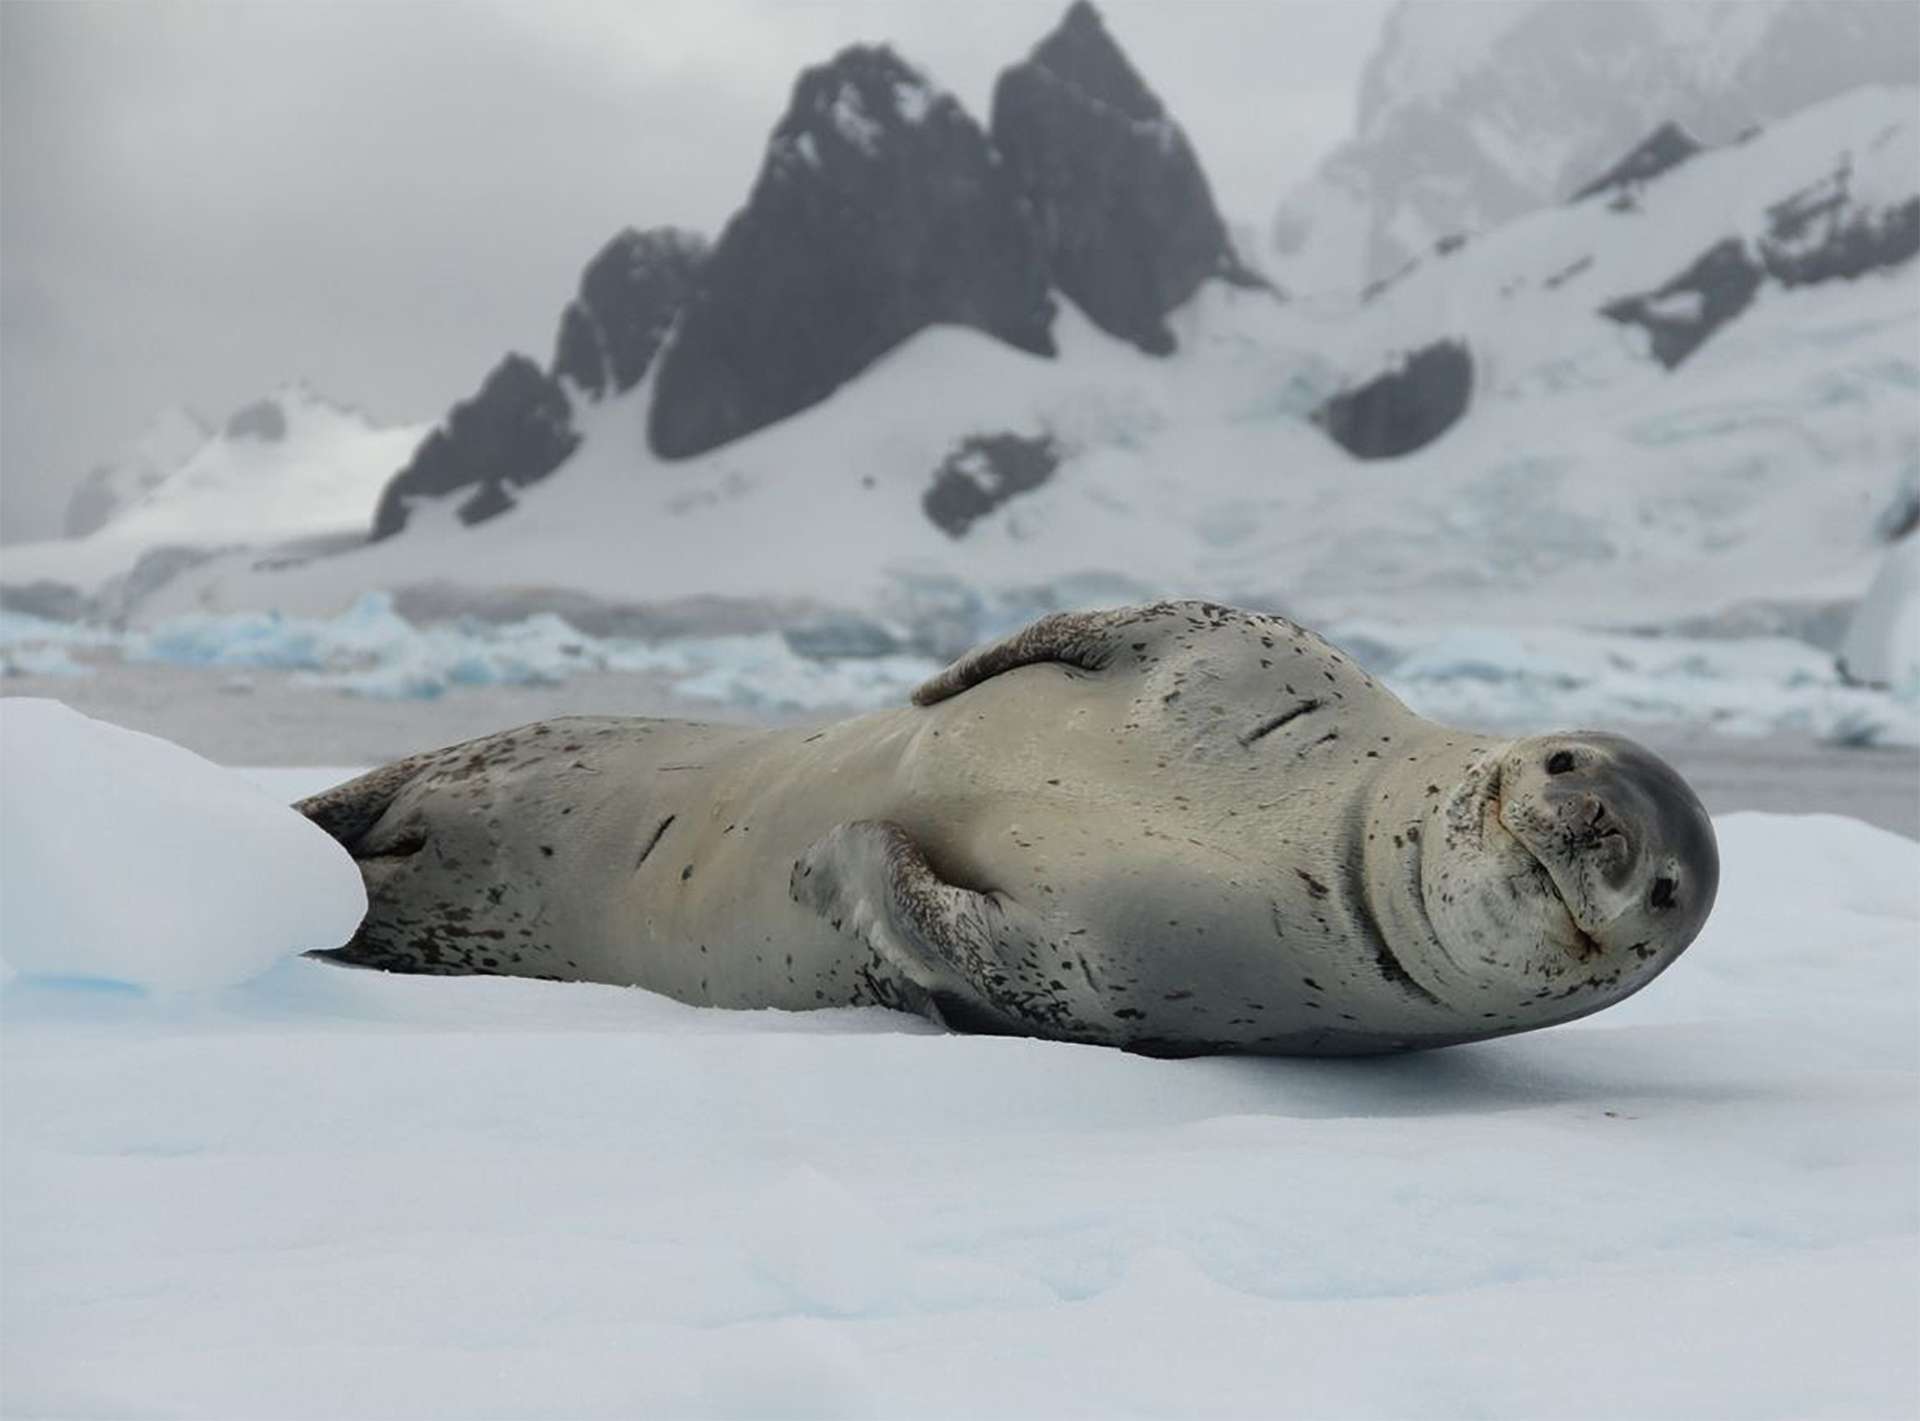 Leopard seal in Antarctica smiling and lounging on the ice